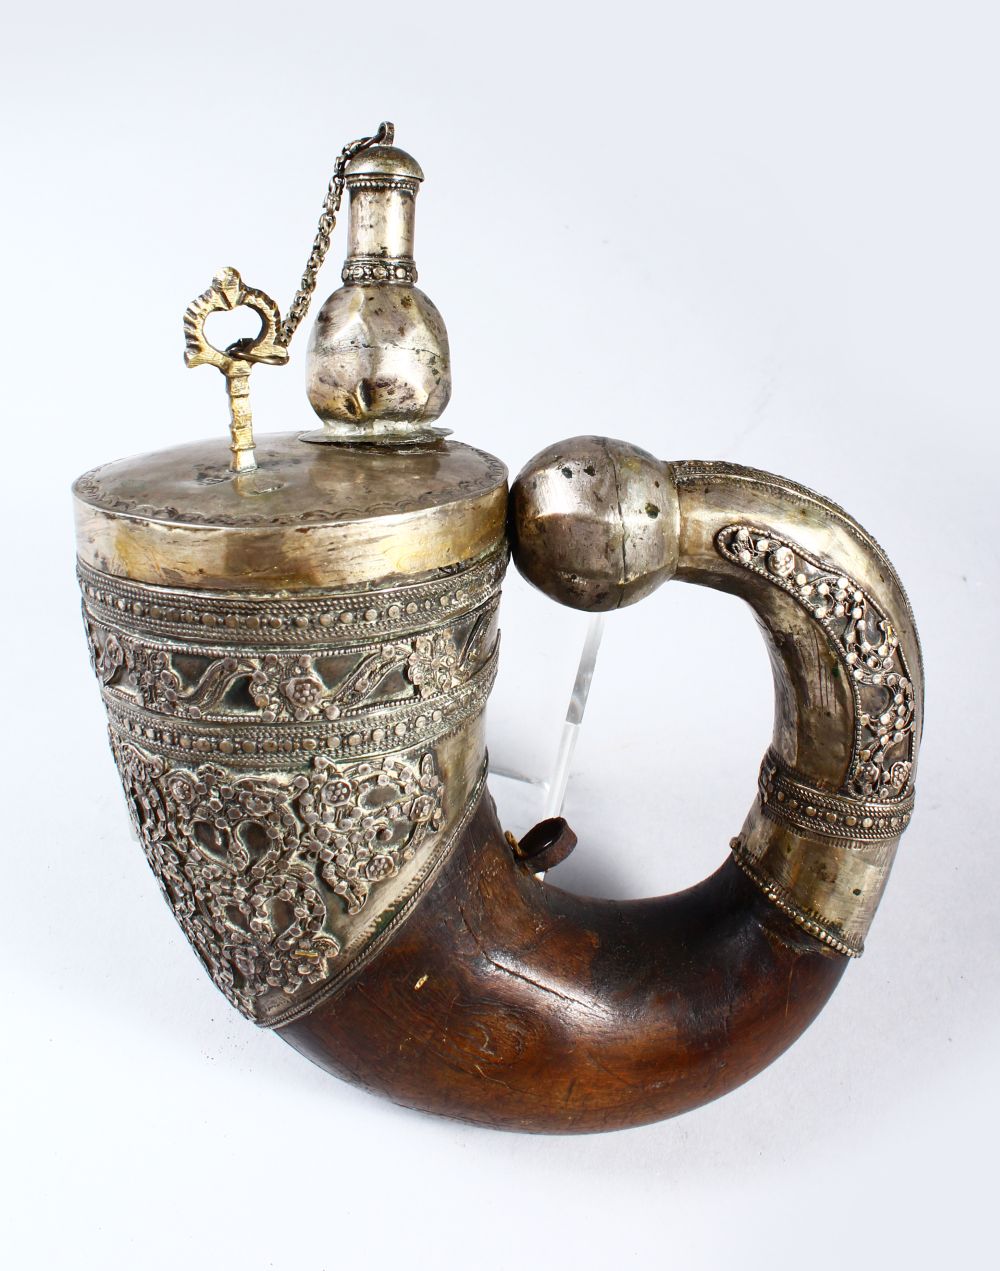 A GOOD EARLY ISLAMIC RHINO HORN AND SILVER MOUNTED COMPLETE POWDER FLASK, with onlaid and engraved